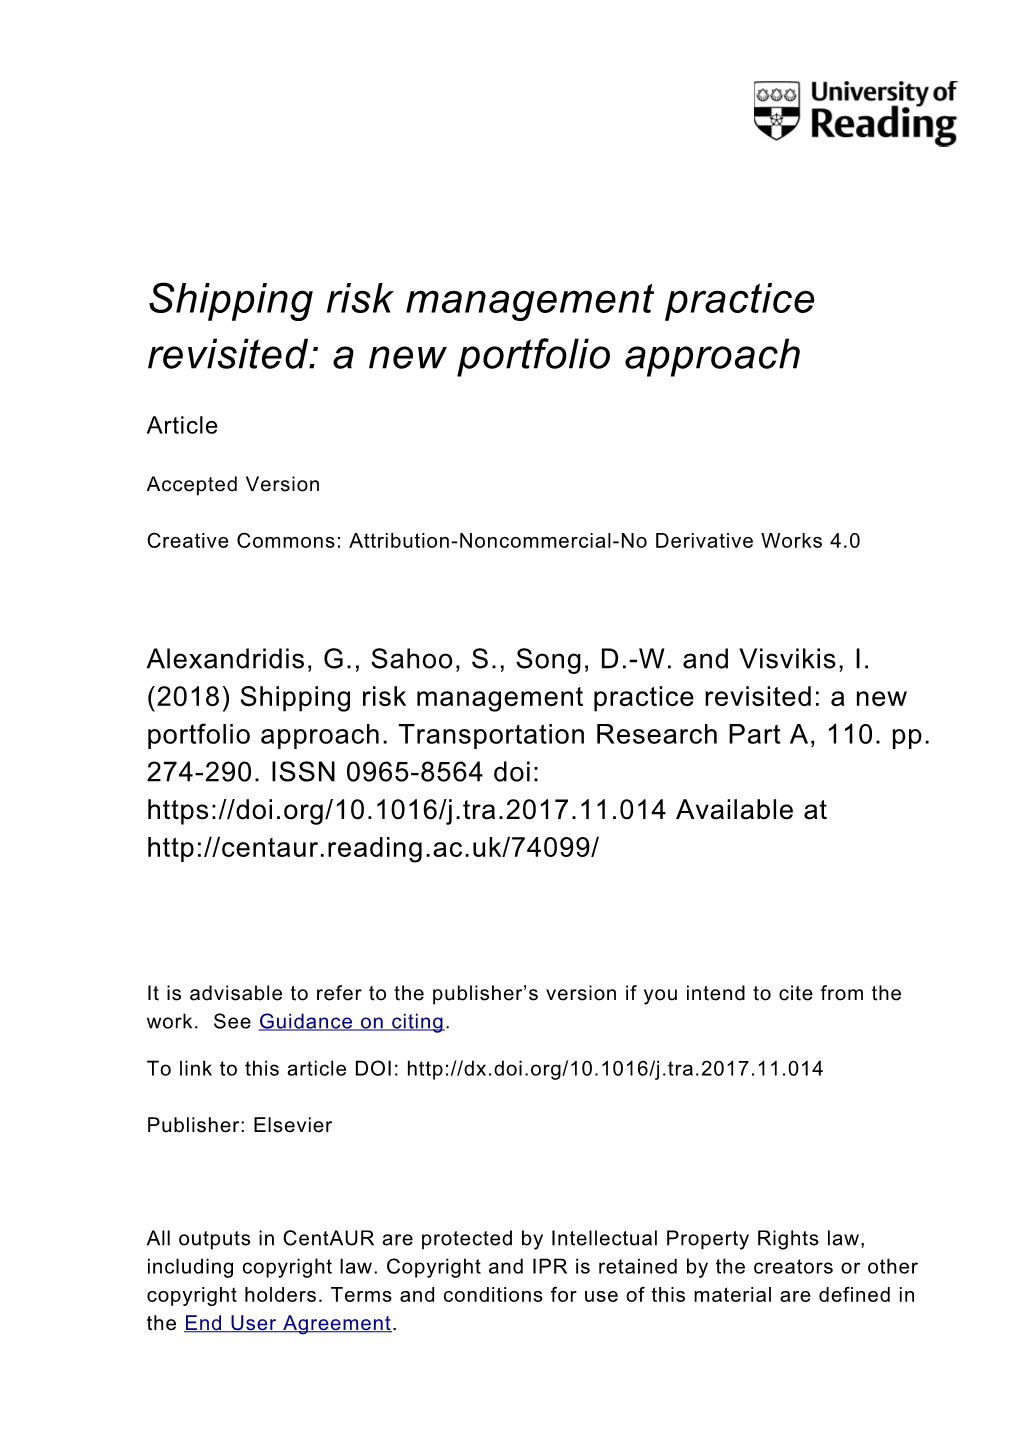 Shipping Risk Management Practice Revisited: a New Portfolio Approach